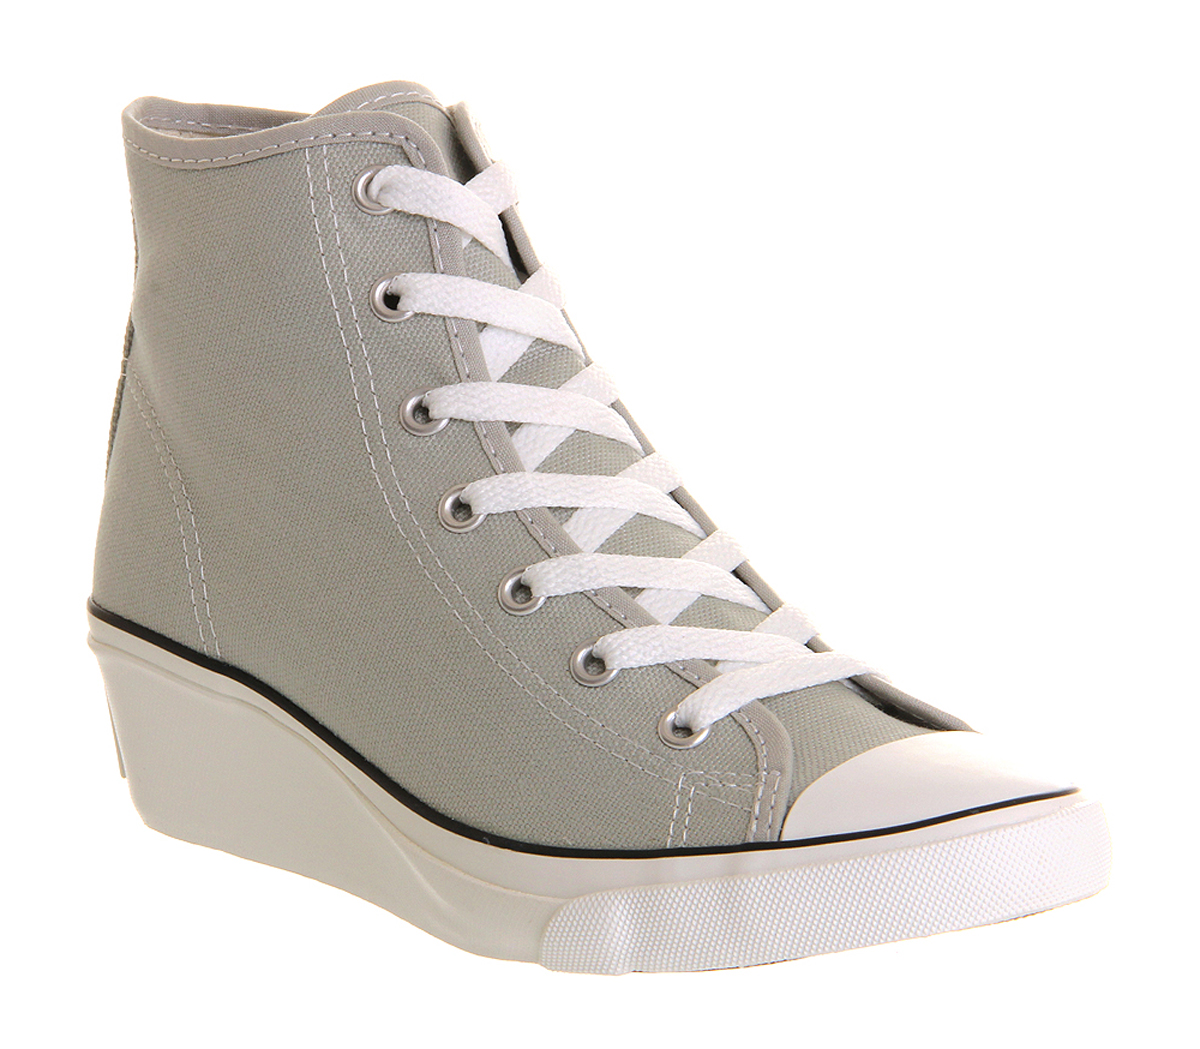 Converse All Star Hi-ness Cloud Grey - Hers trainers